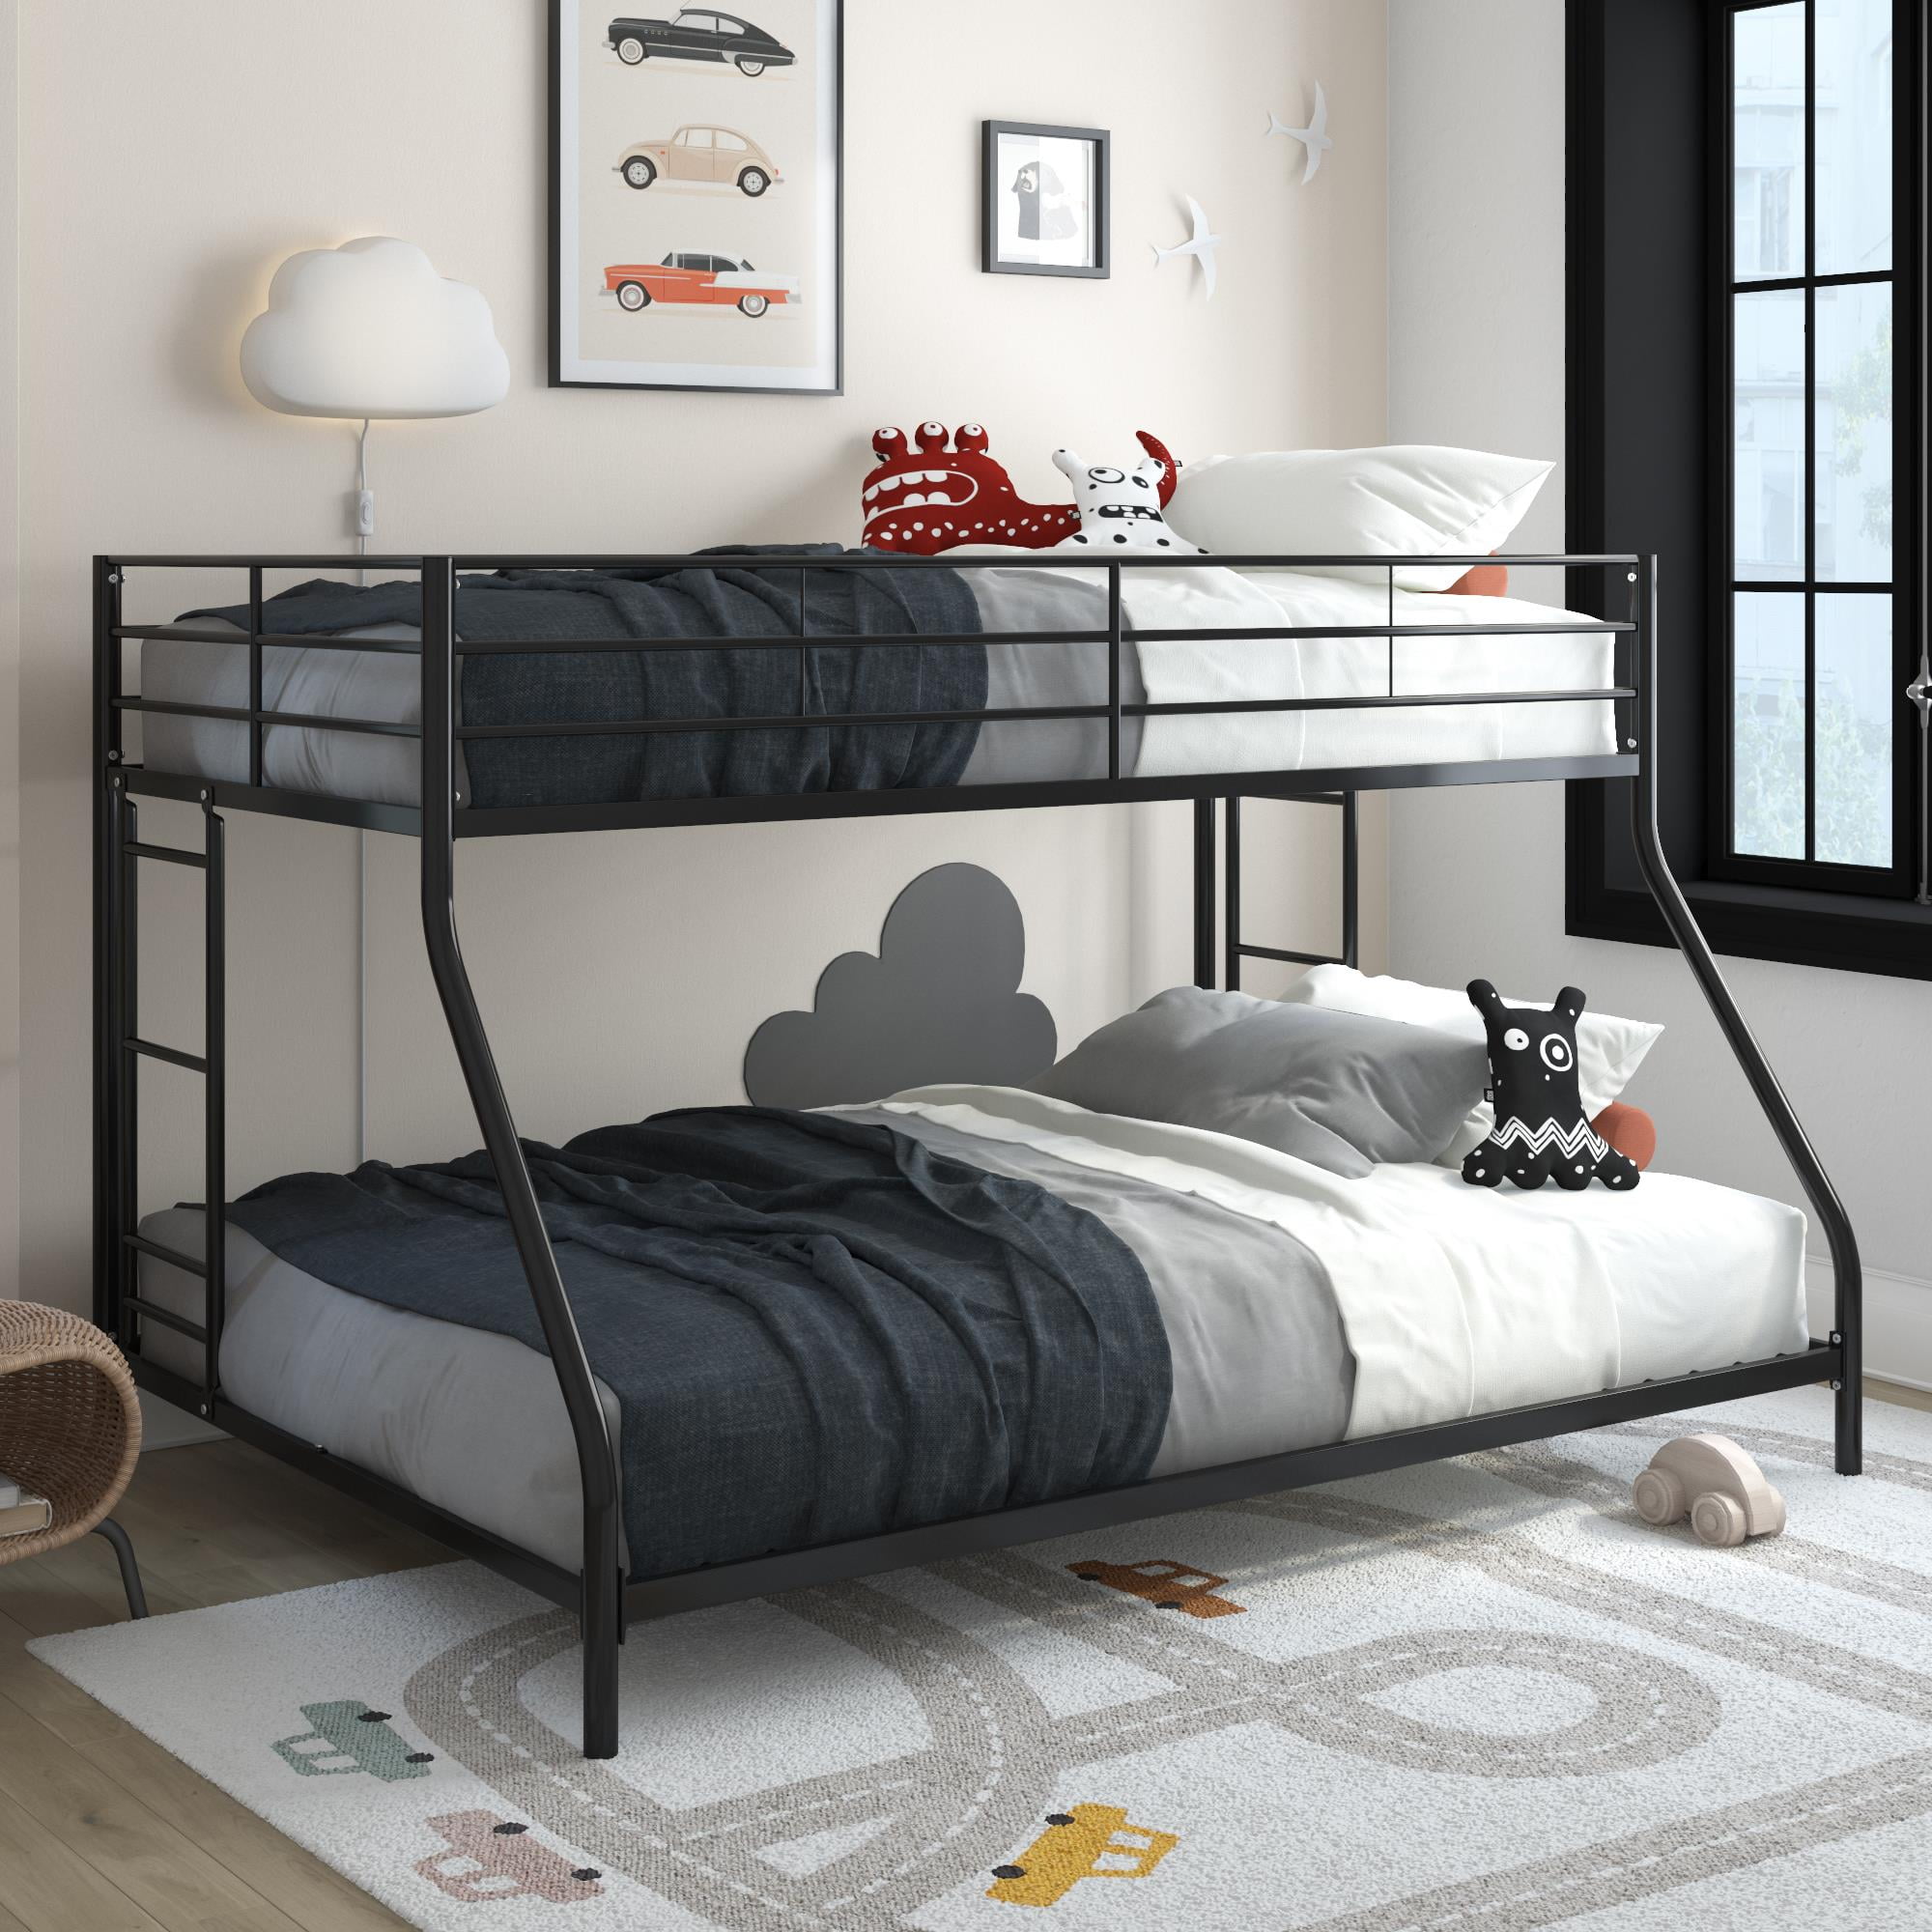 Mainstays Small Space Junior Twin Over, Jr Bunk Beds